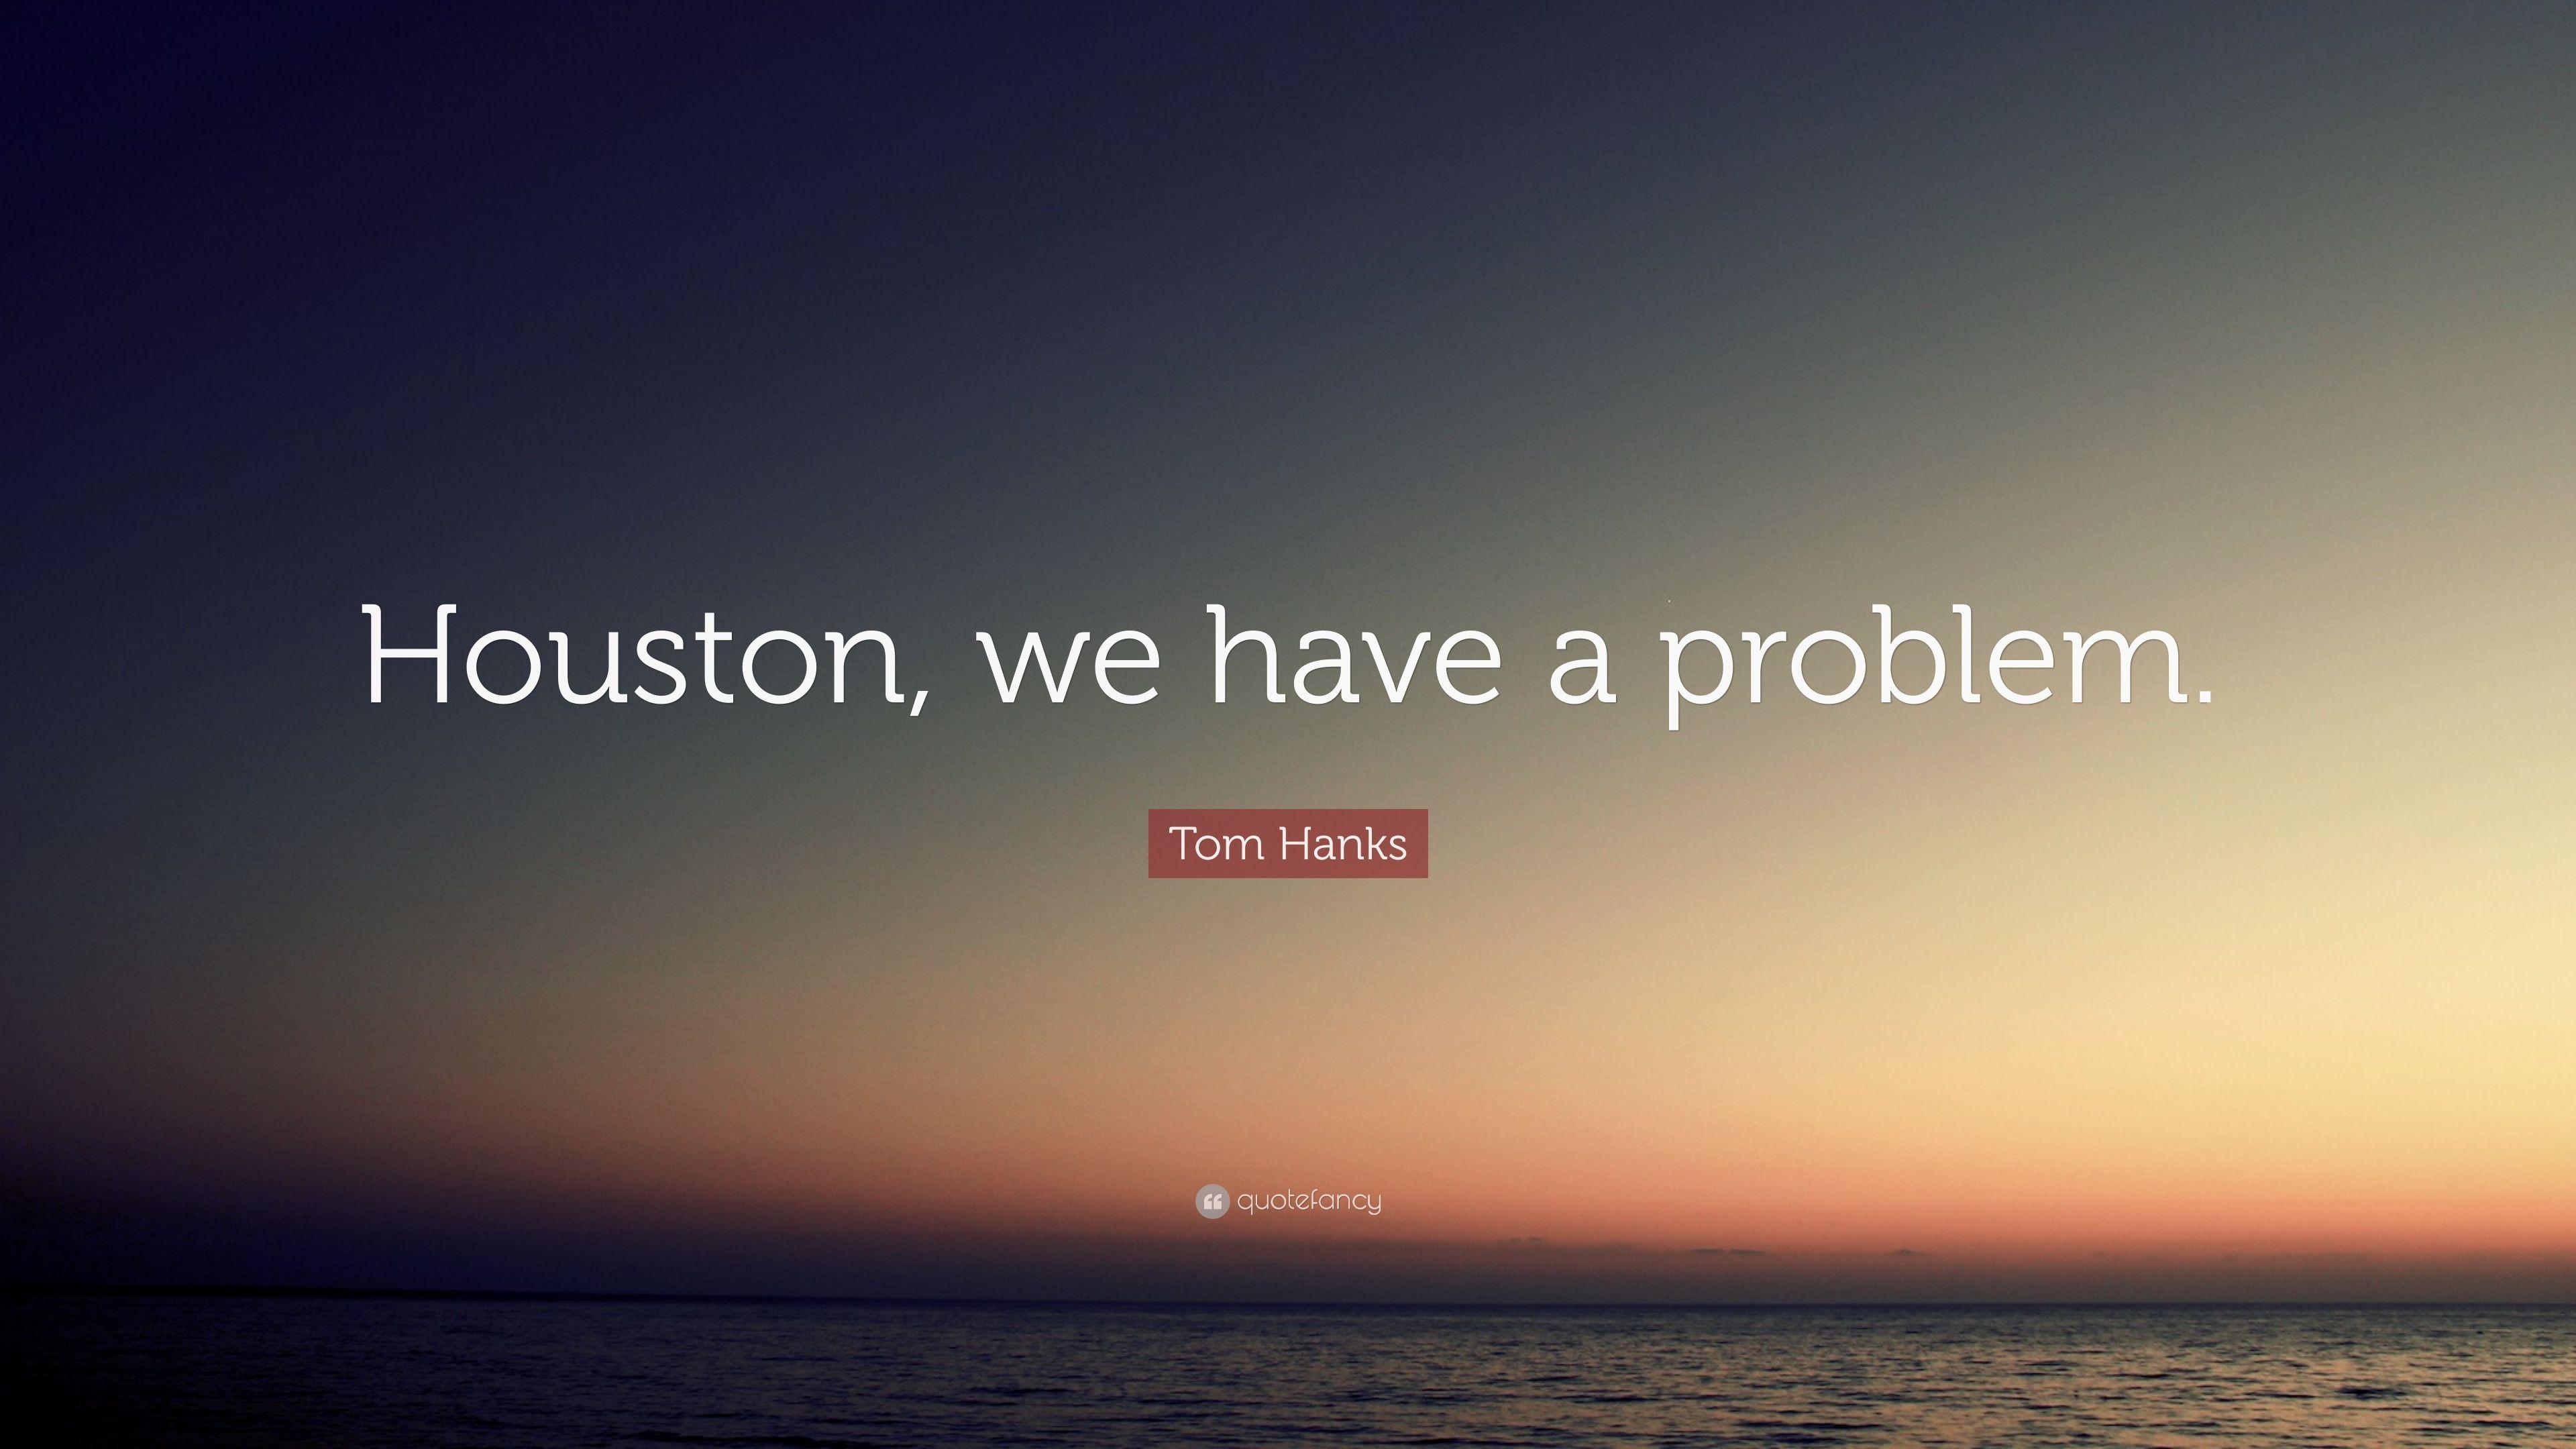 Tom Hanks Quote: “Houston, we have a problem.” 12 wallpaper